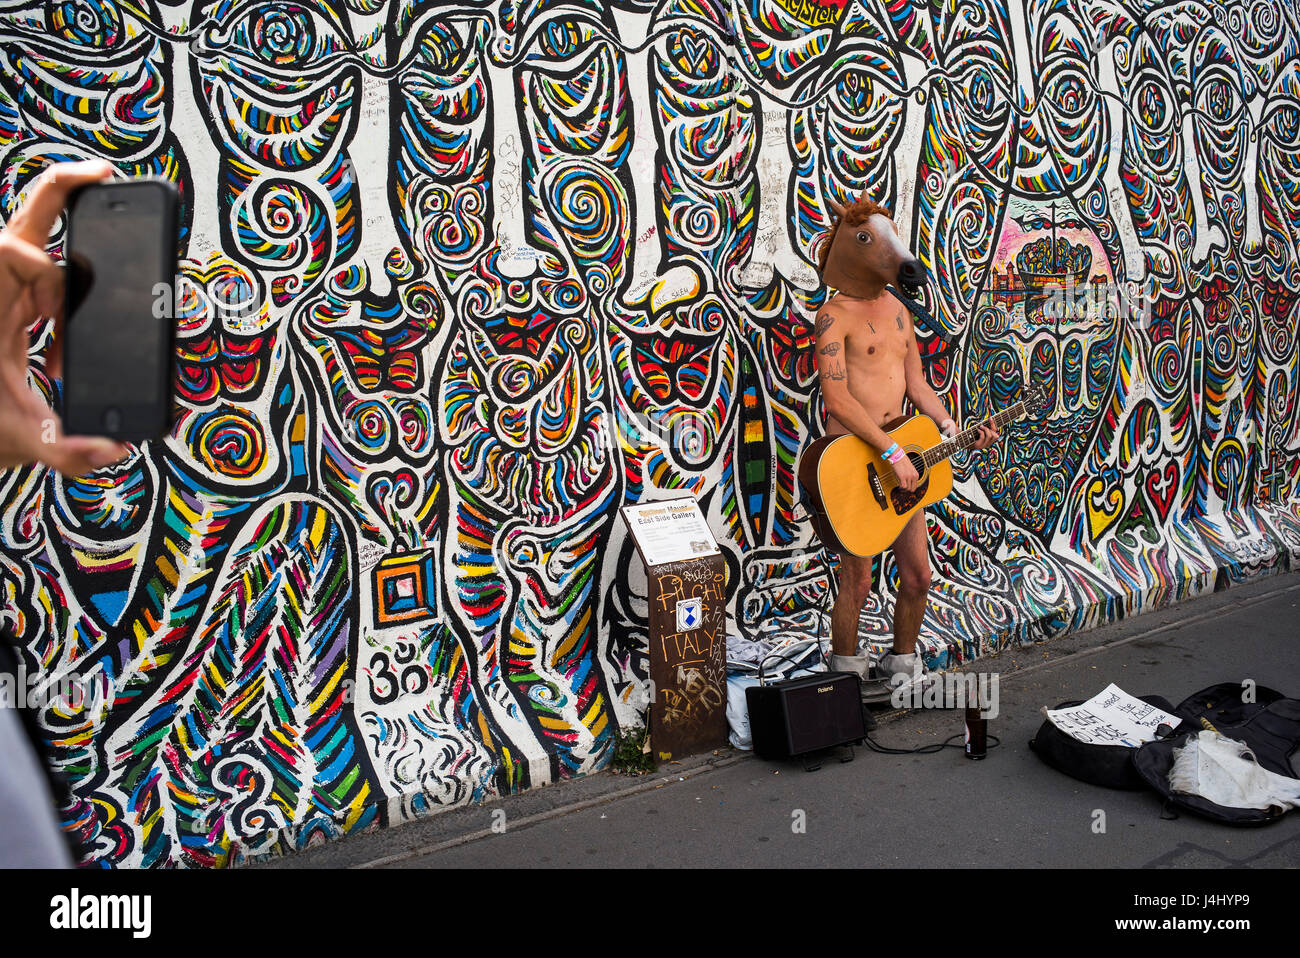 A street busker wearing little else than a horse head mask and a guitar as he sings in front of a mural at Berlin's East Side Gallery. Stock Photo